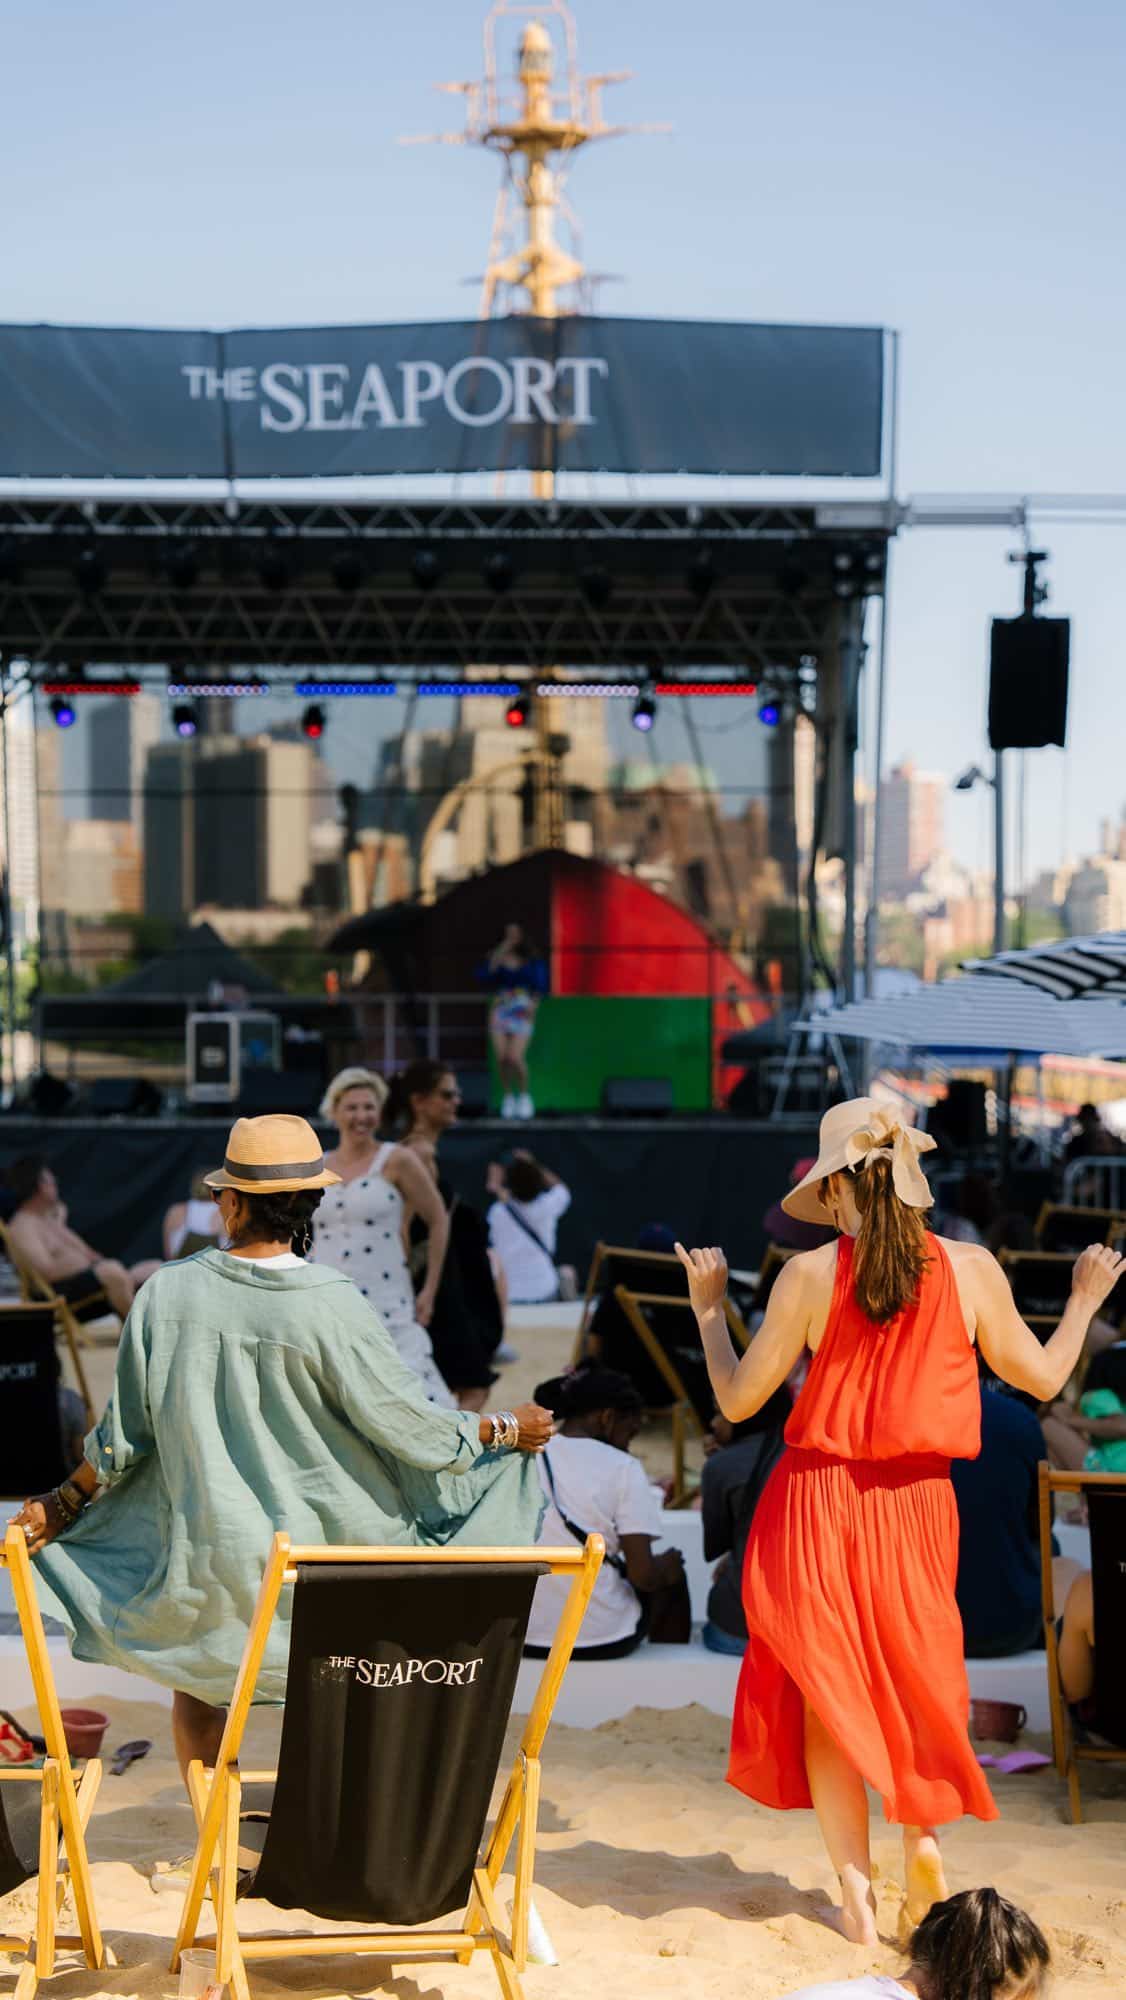 NYC danced the night away at #TheSeaport Beach Fest! See you again today and tmrw for more fun in the sun ️😎 Seaport Square July 29: 12pm – 10pm July 30: 12pm – 9:30pm Music is brought to you by #SeaportSounds presented by Heineken  RSVPs are encouraged but not required. All seating is on the first come, first served basis.